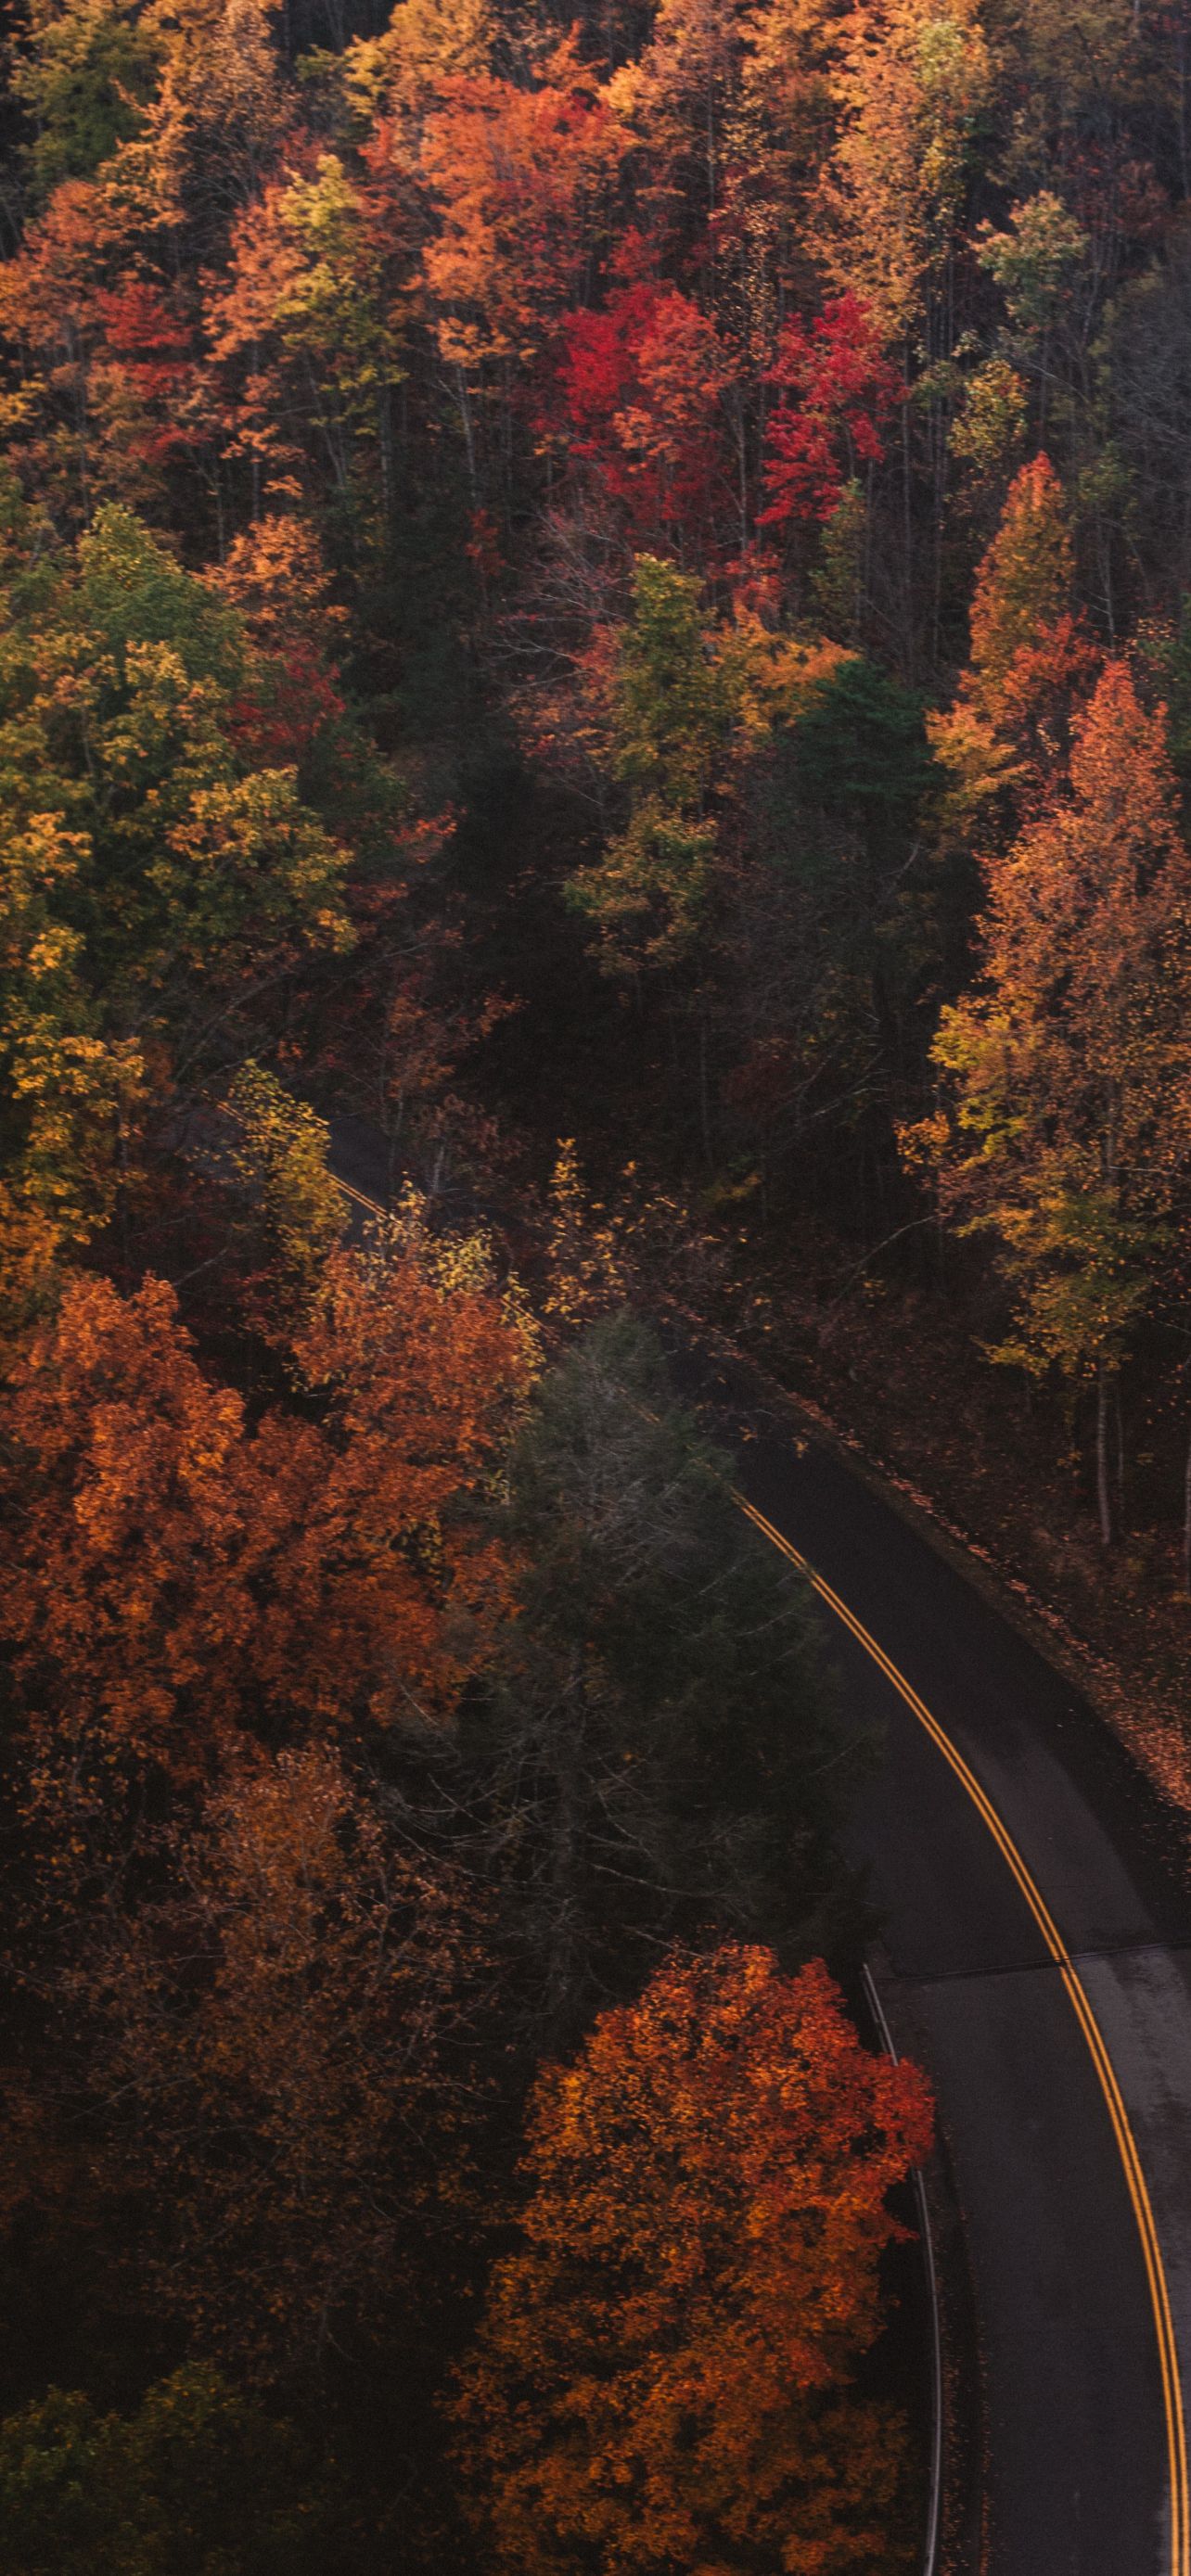 A road that is surrounded by trees - Fall